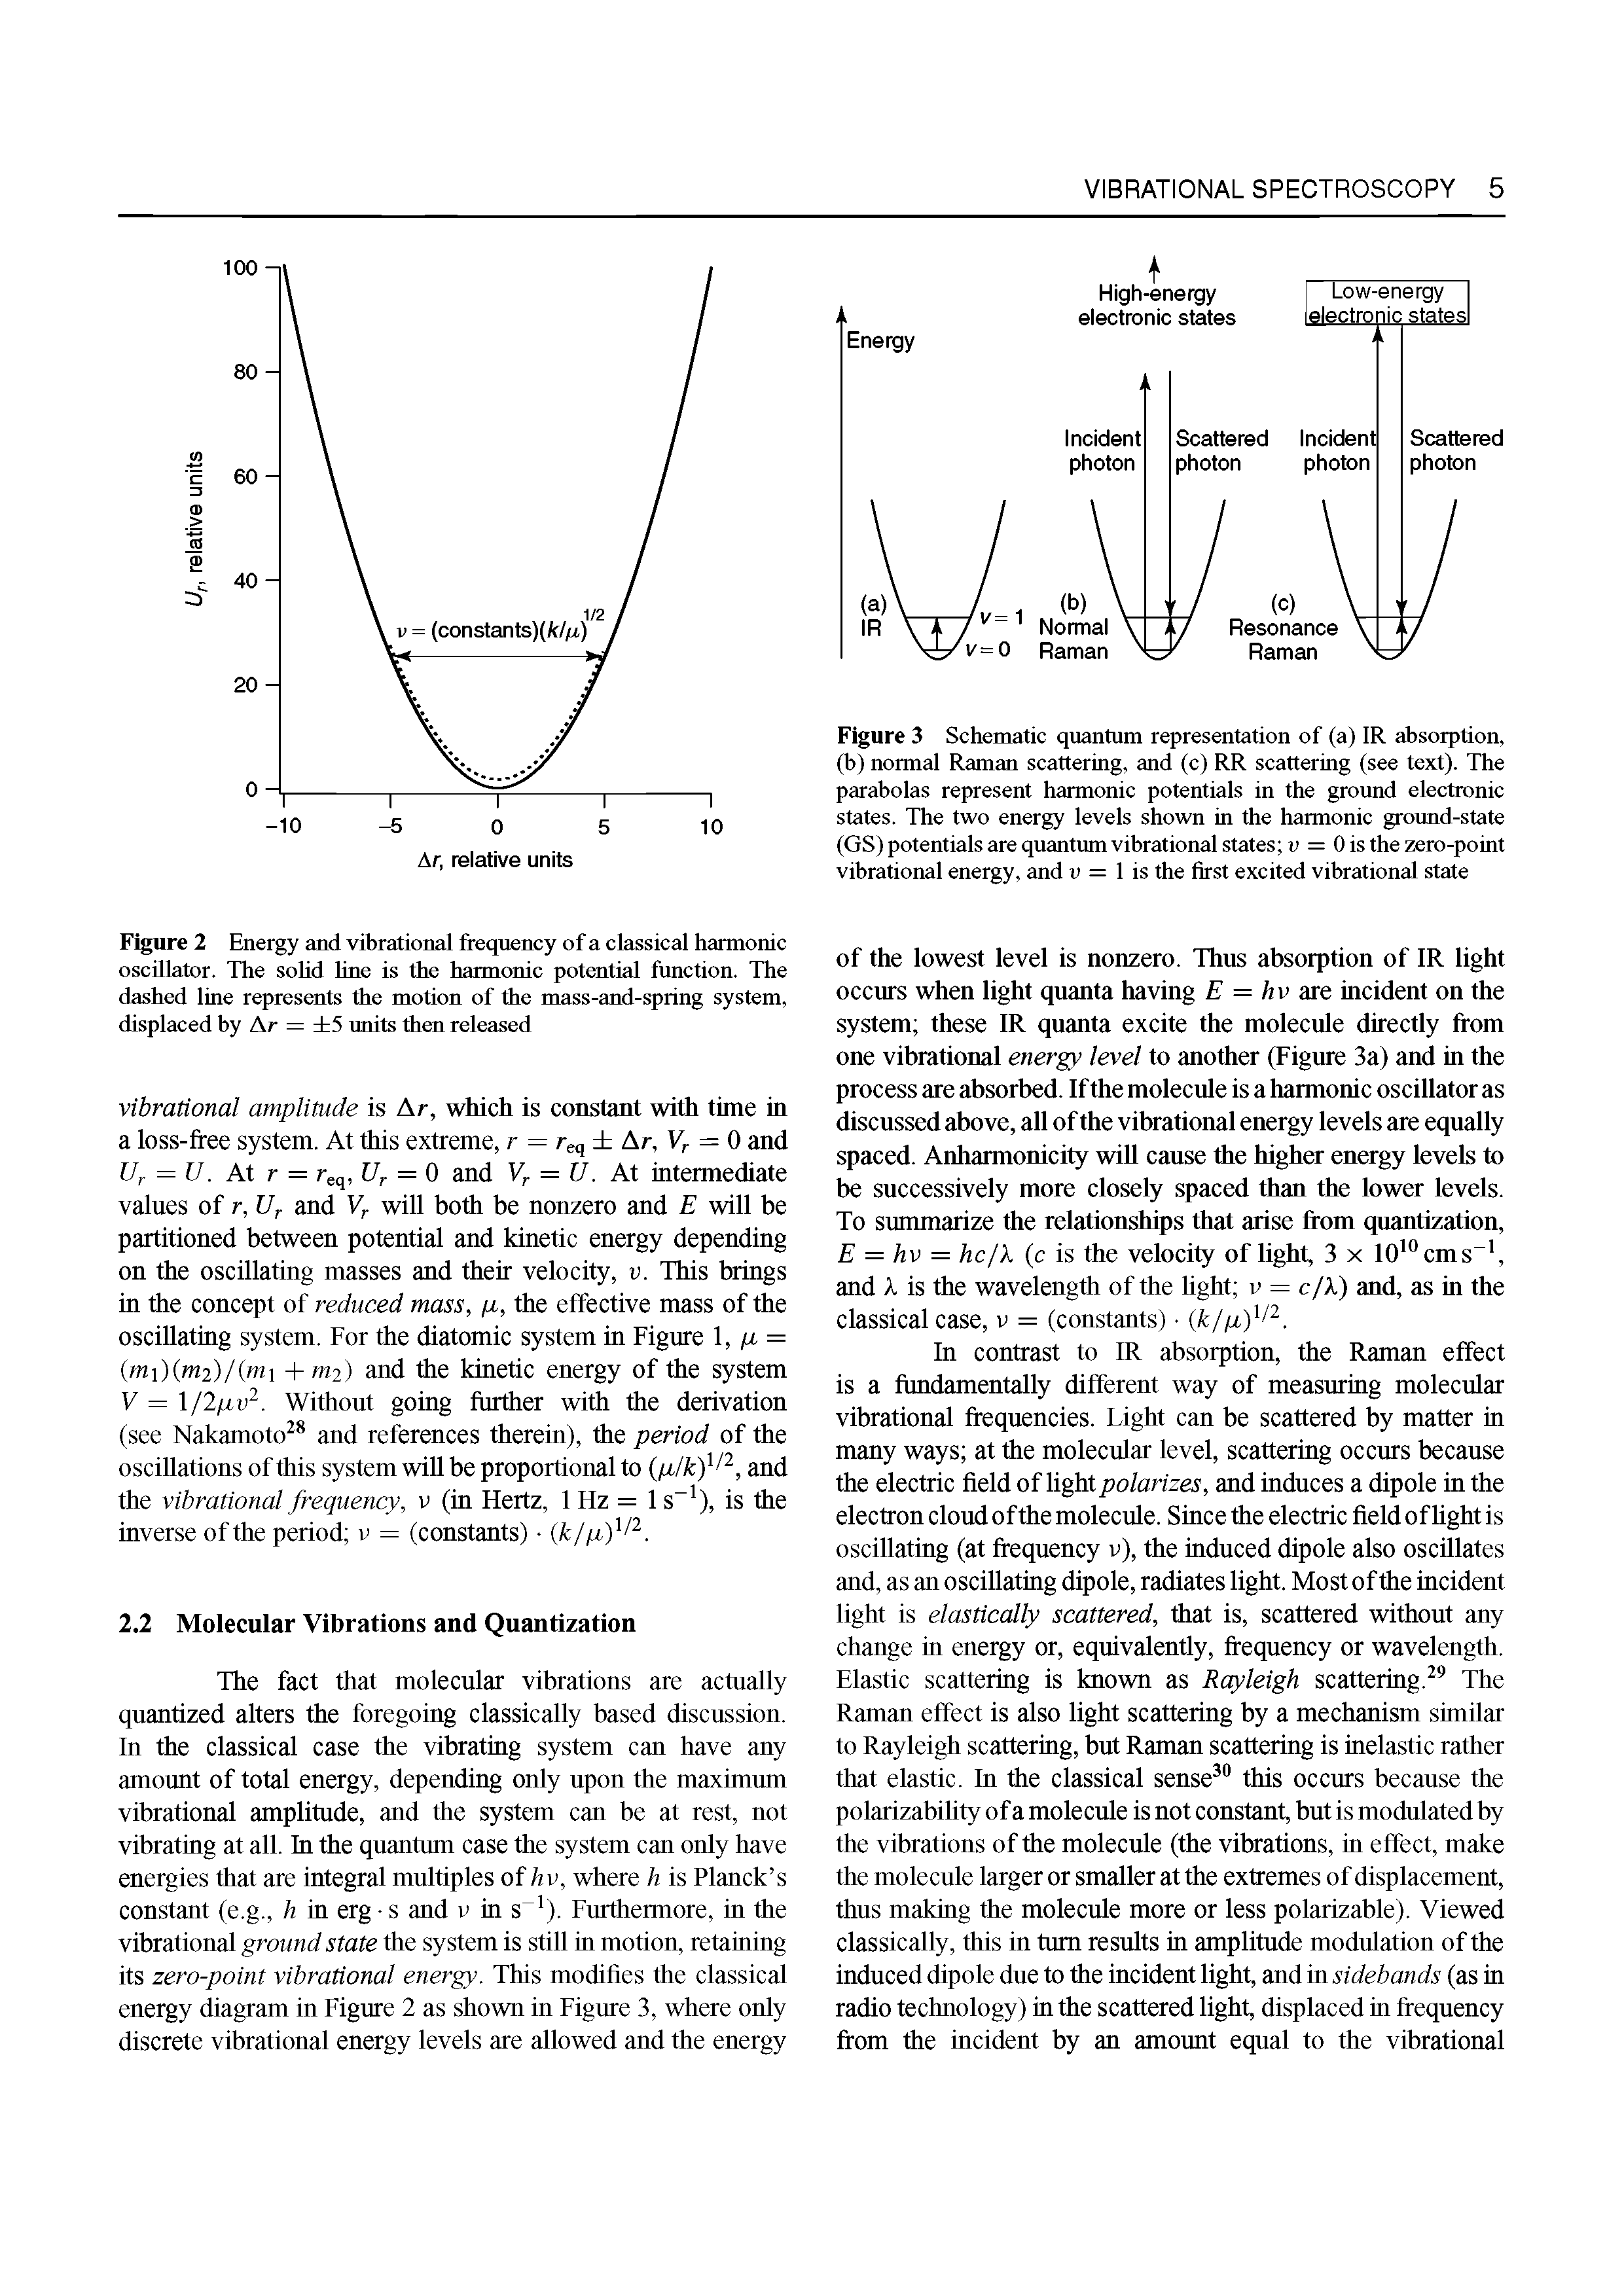 Figure 3 Schematic quantum representation of (a) IR absorption, (b) normal Raman scattering, and (c) RR scattering (see text). The parabolas represent harmonic potentials in the ground electronic states. The two energy levels shown in the harmonic groimd-state (GS) potentials are quantum vibrational states u = 0 is the zero-point vibrational energy, and u = 1 is the first excited vibrational state...